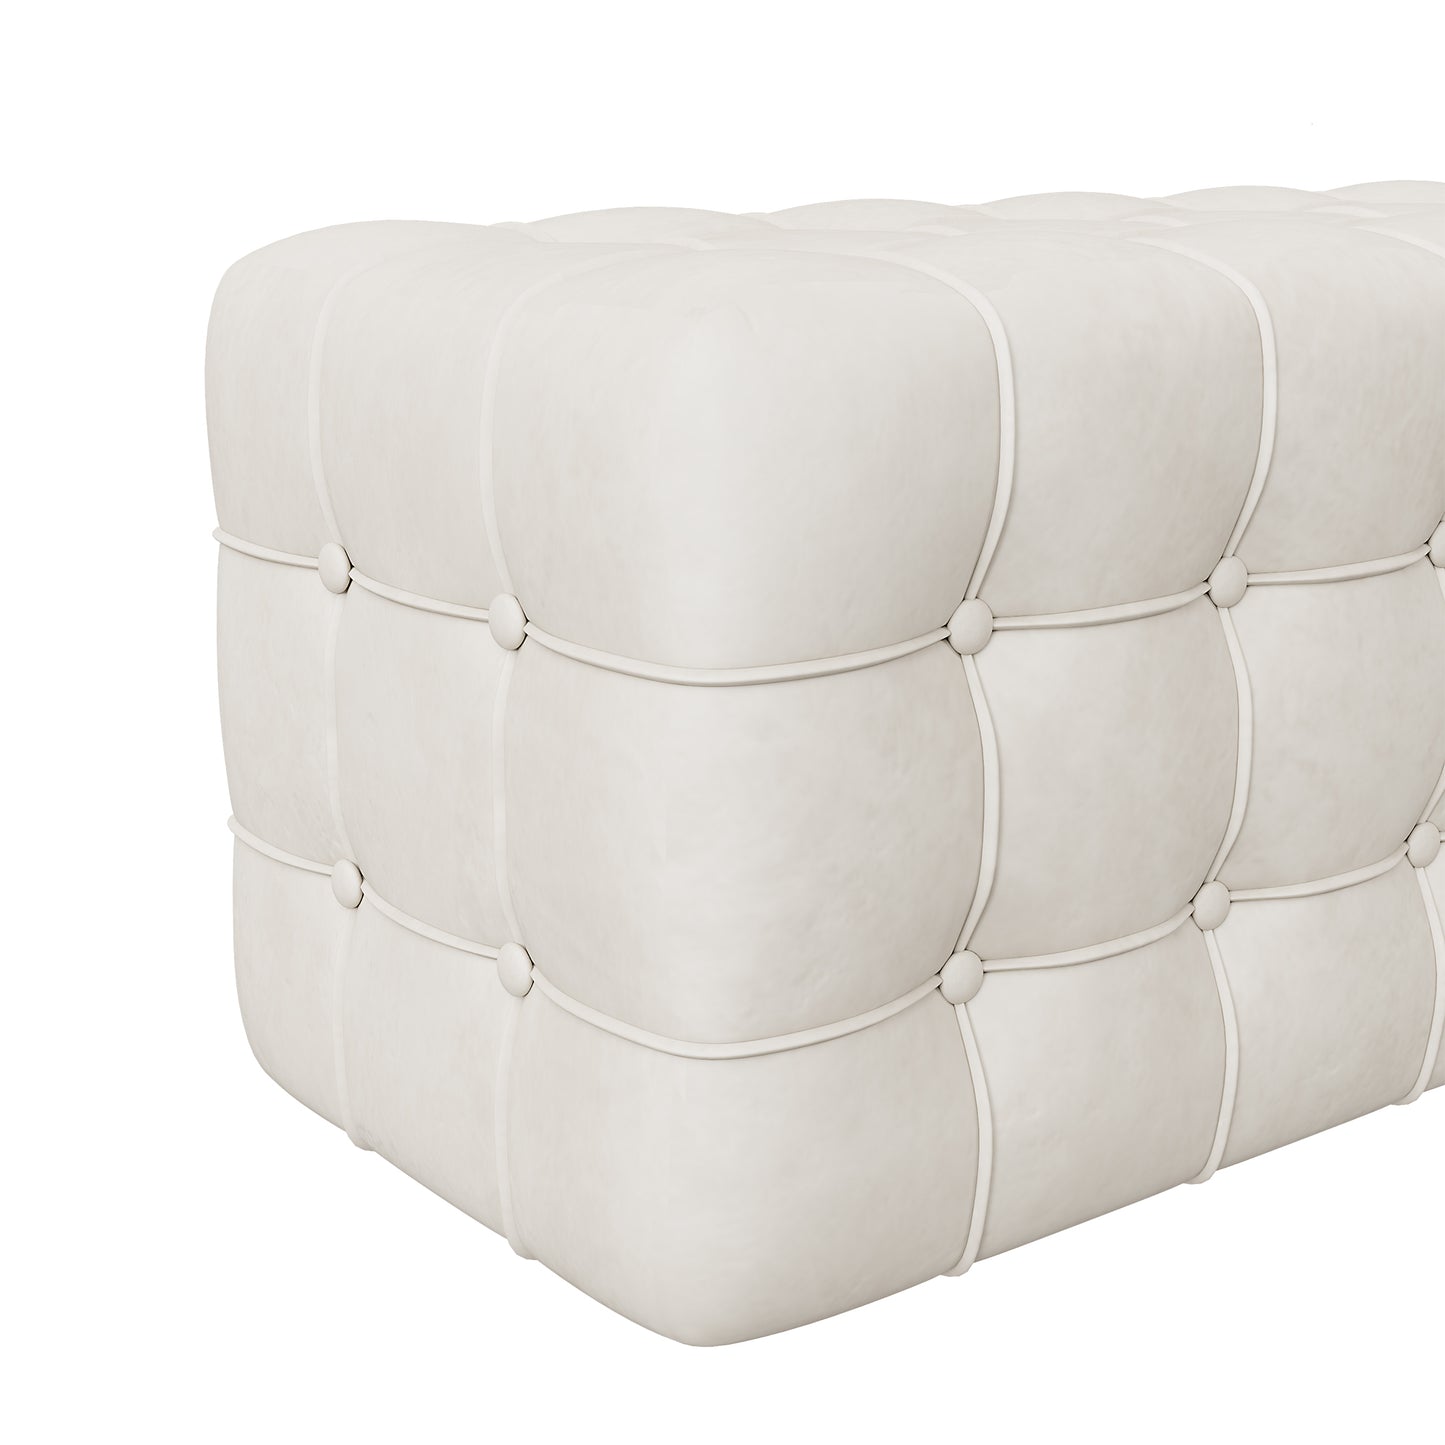 All Covered Velvet Upholstered Ottoman, Rectangular Footstool, Bedroom Footstool, No Assembly Required, Elegant and Luxurious, White